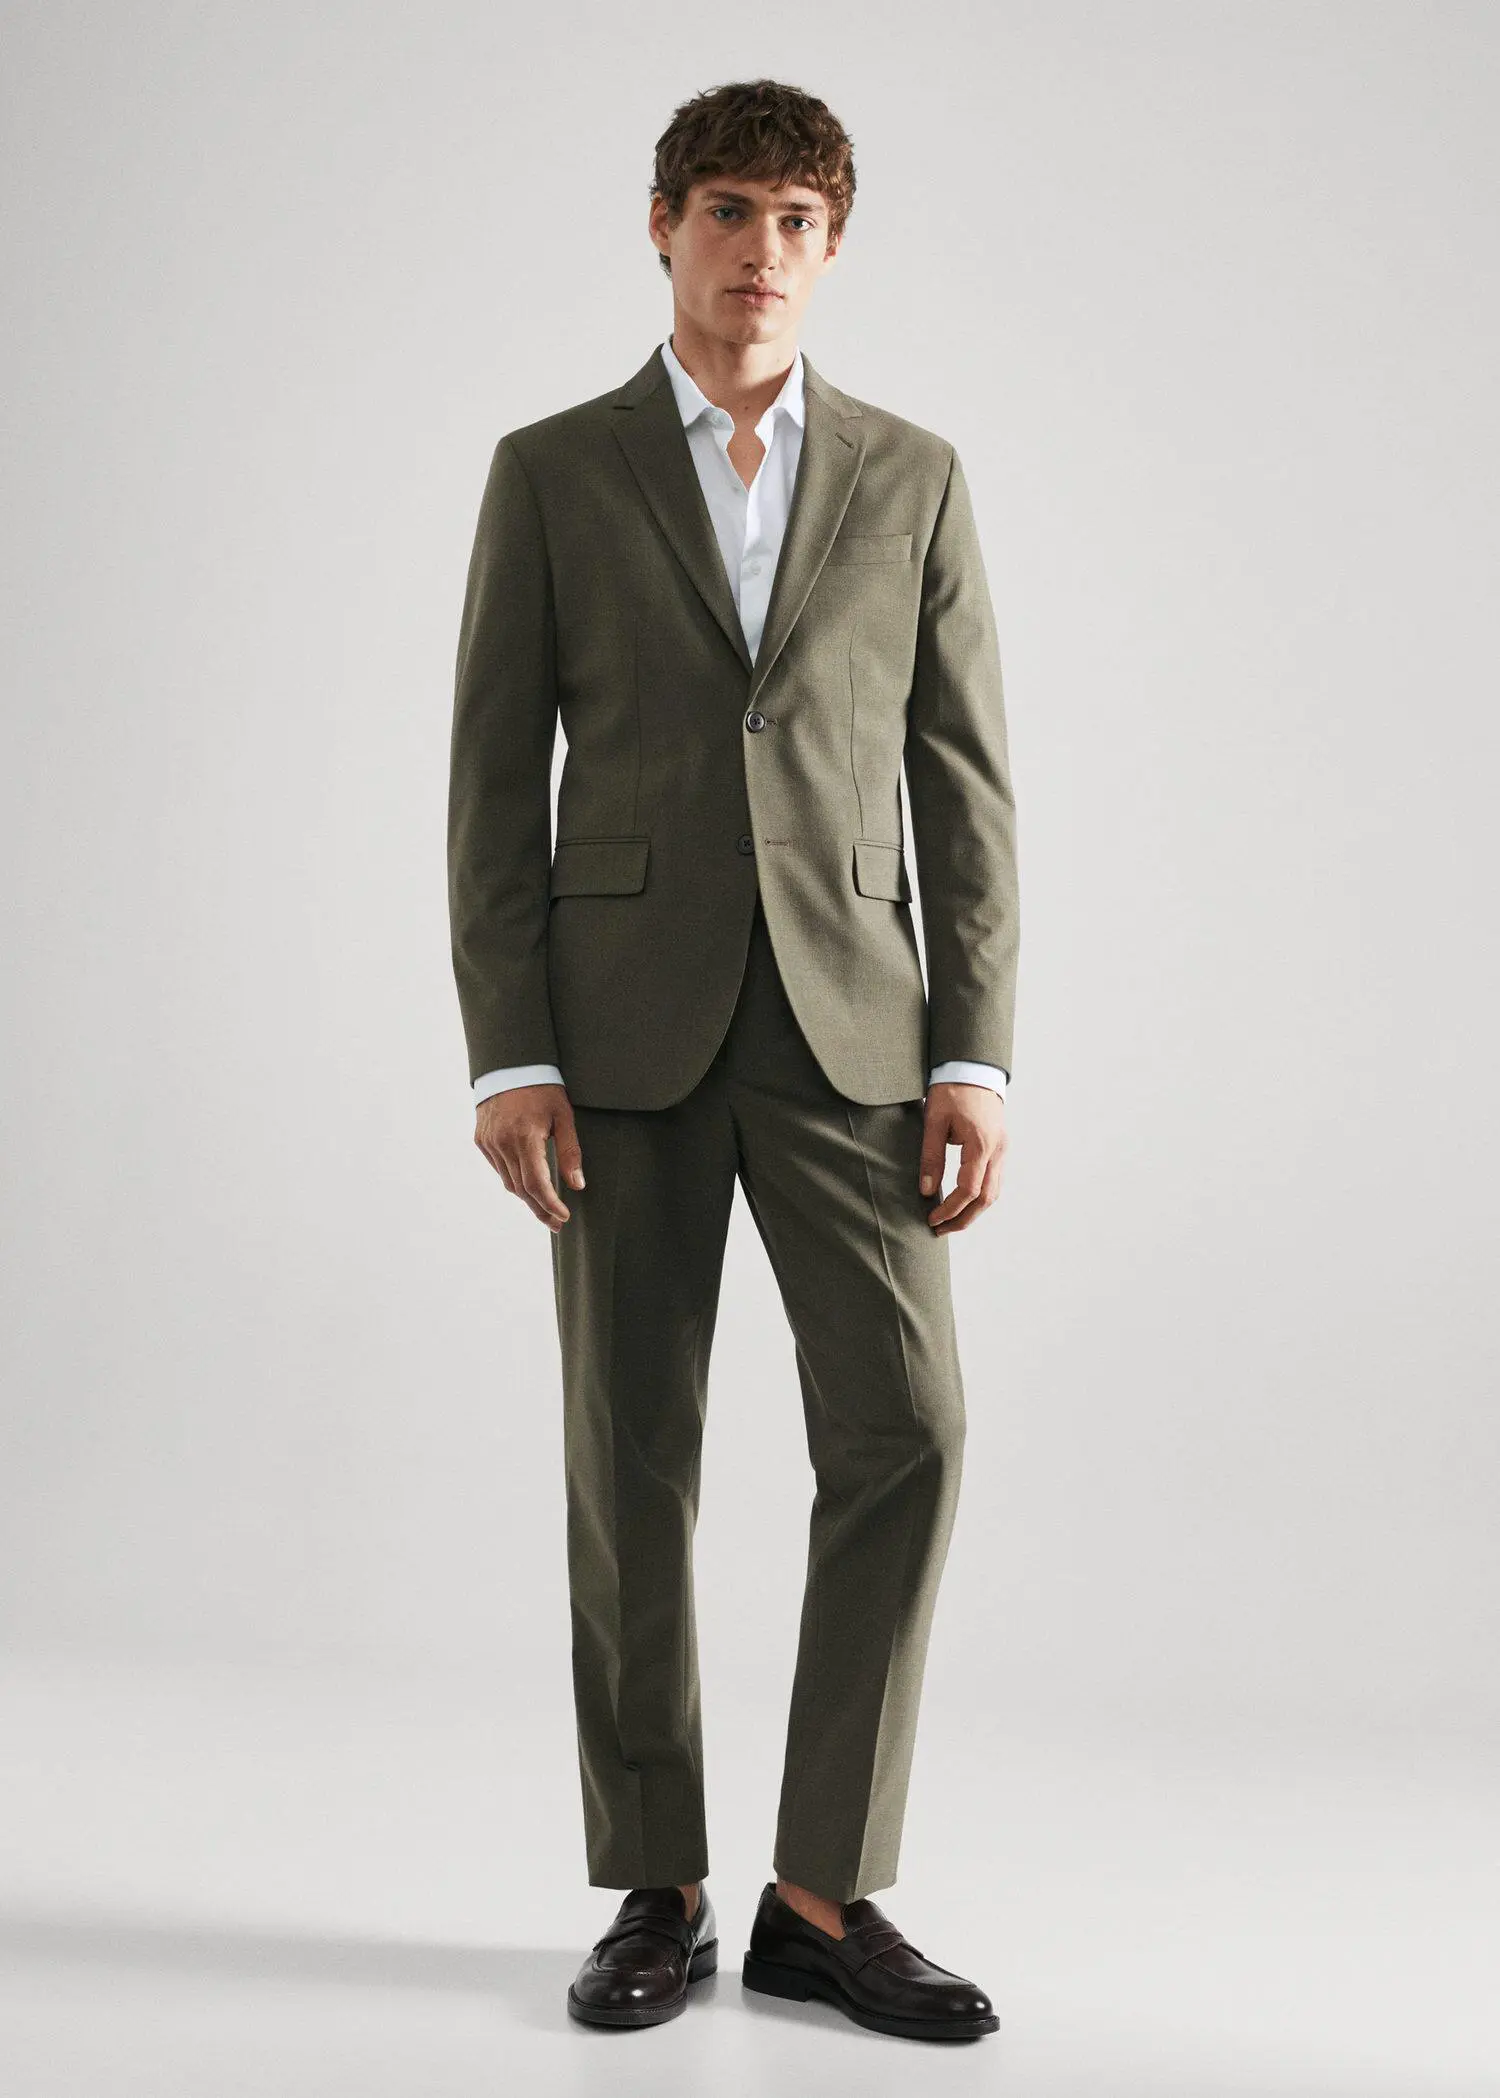 Mango Slim-fit cotton poplin suit shirt. a man wearing a suit and tie standing in a room. 